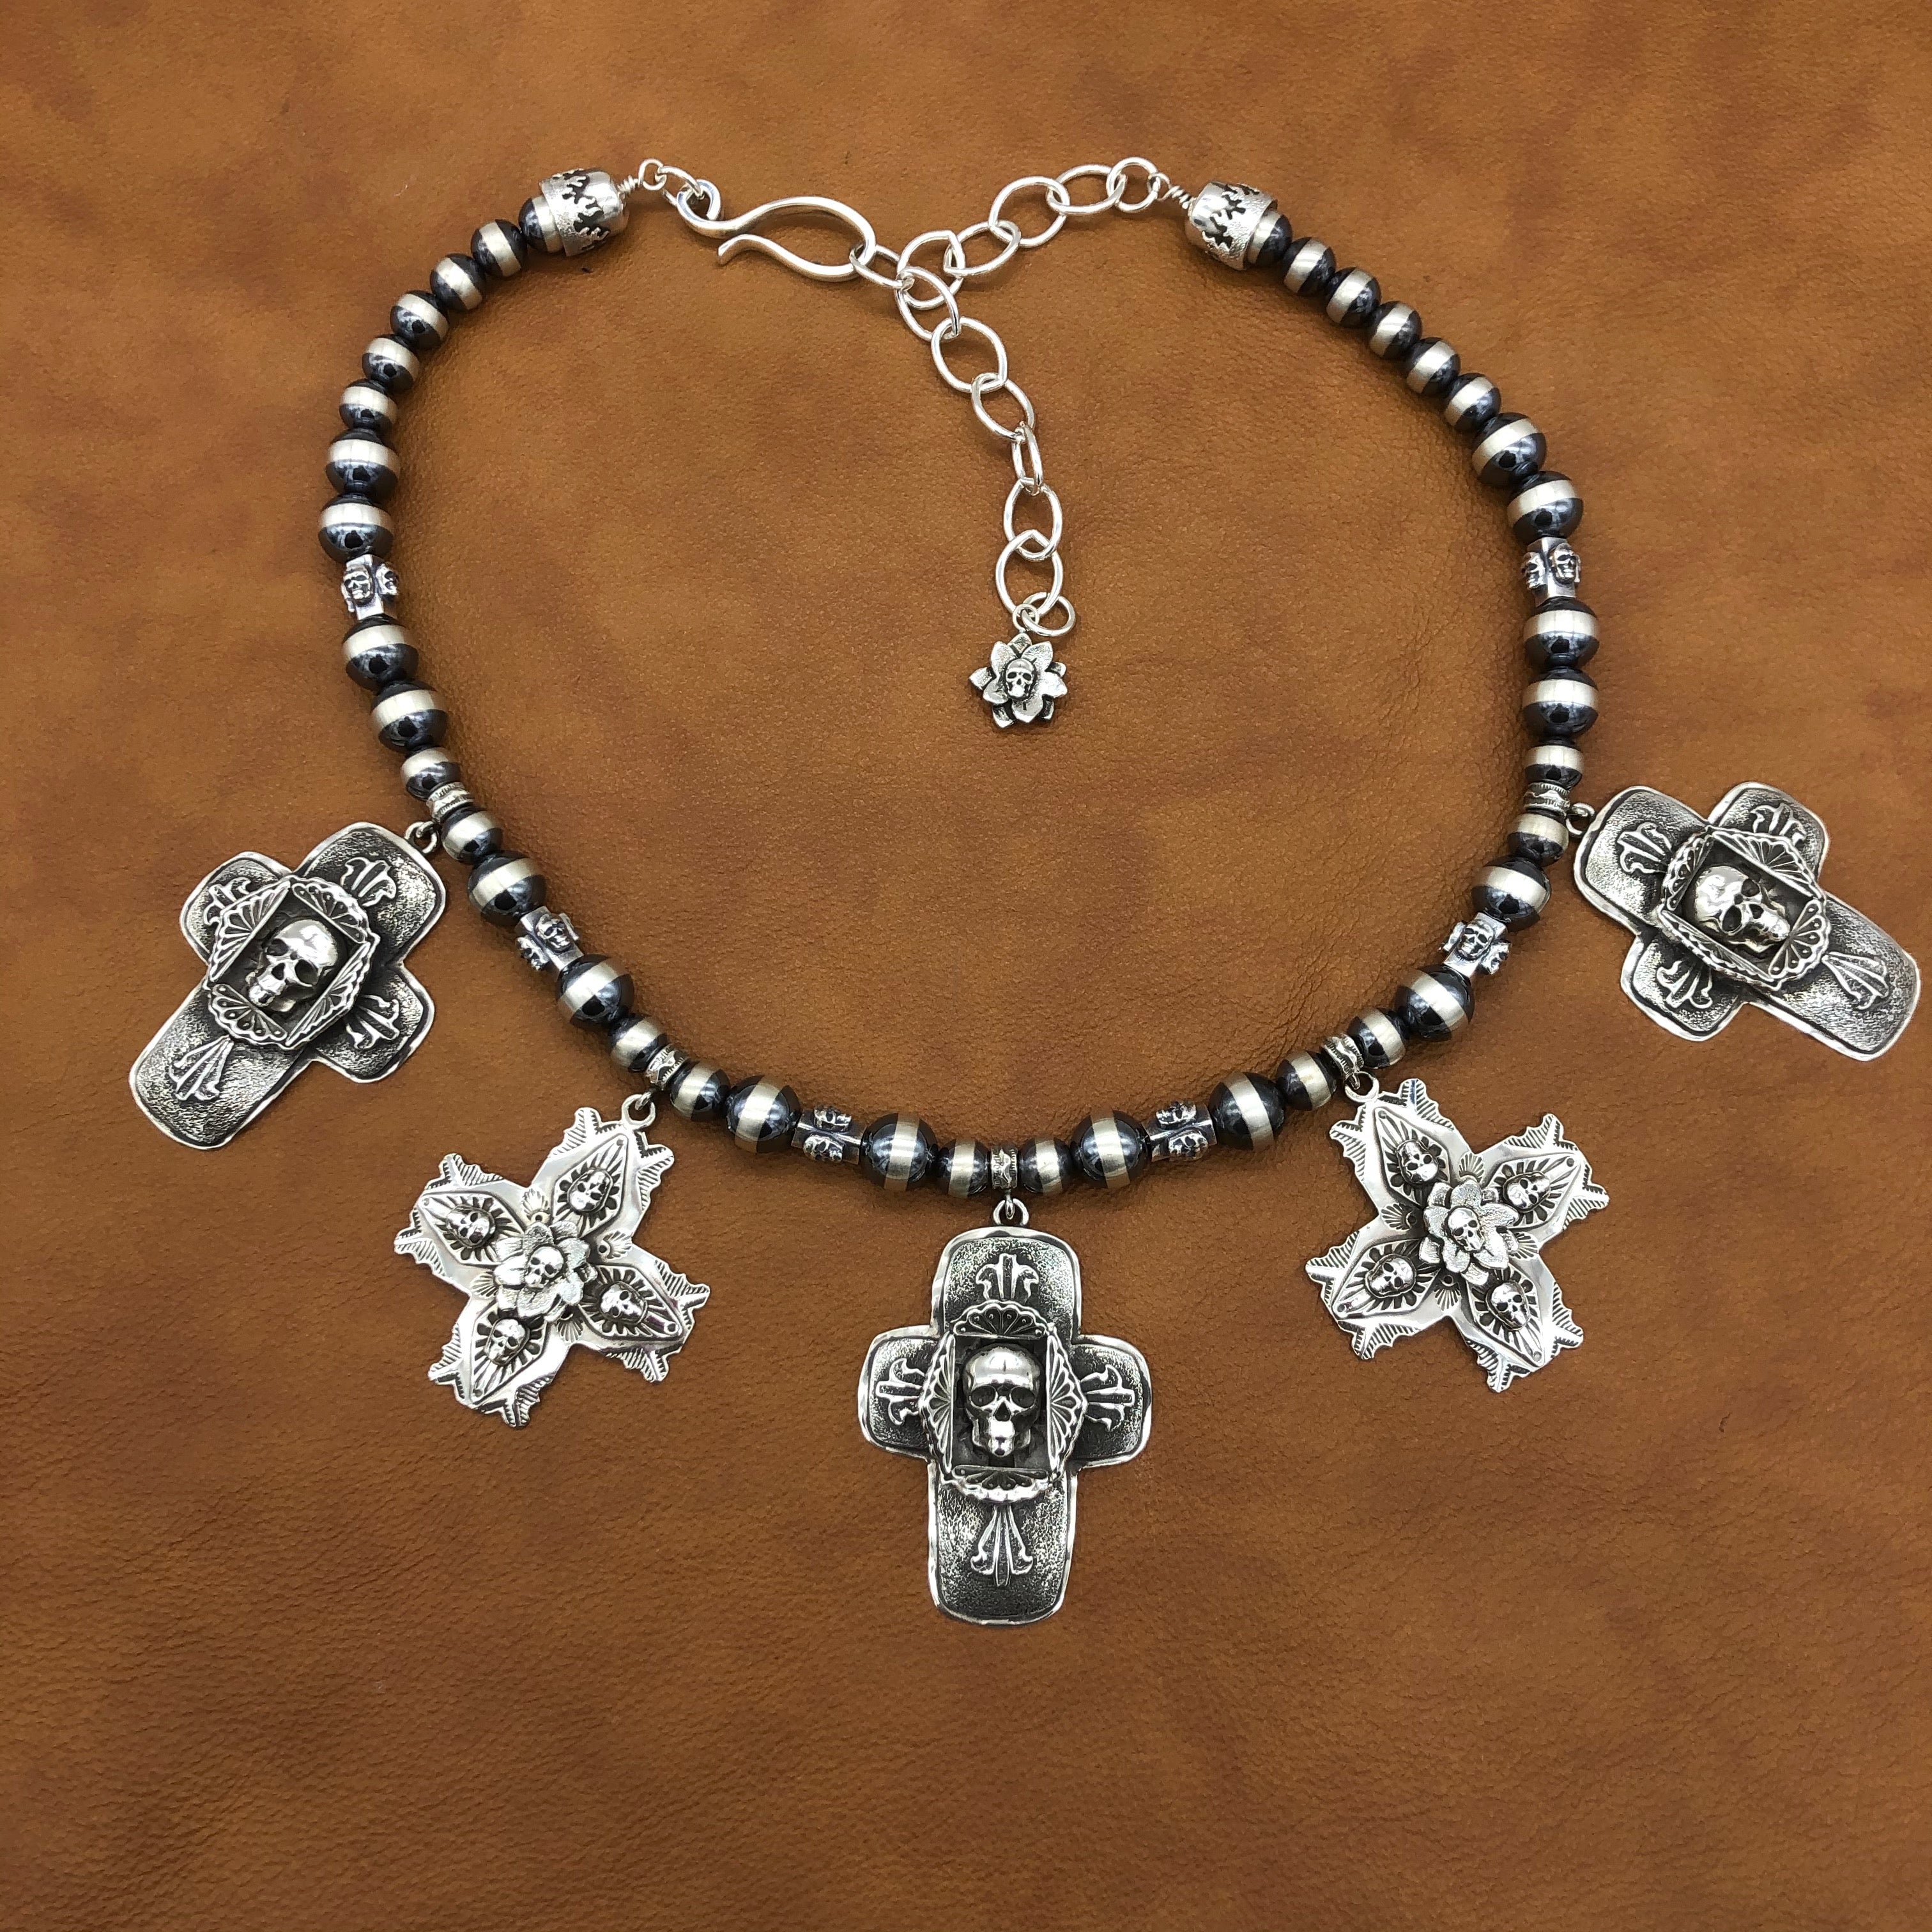 N206 Skulls and Crosses Sterling Silver Necklace